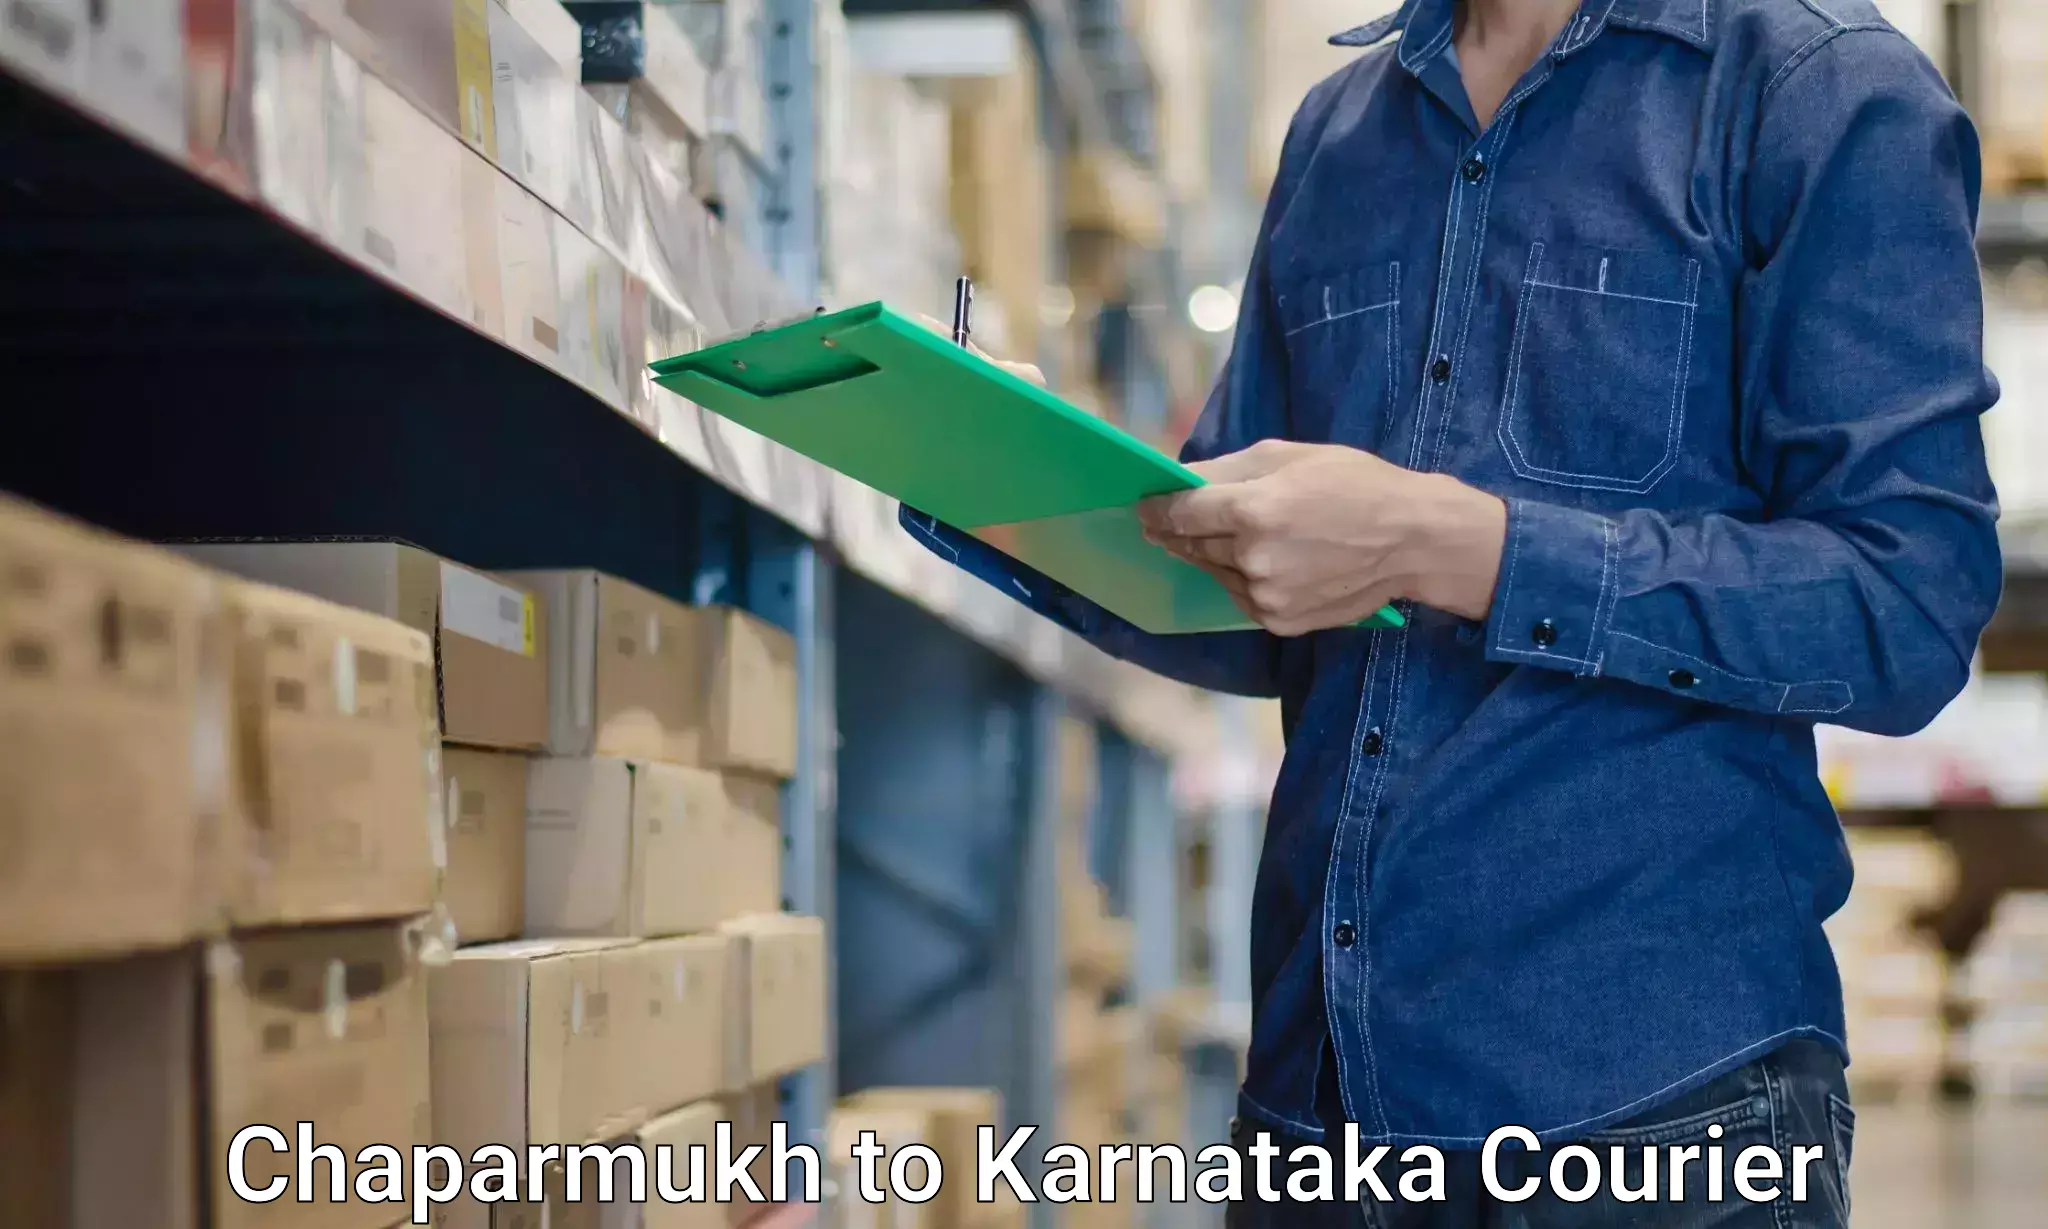 Home moving specialists Chaparmukh to Davangere